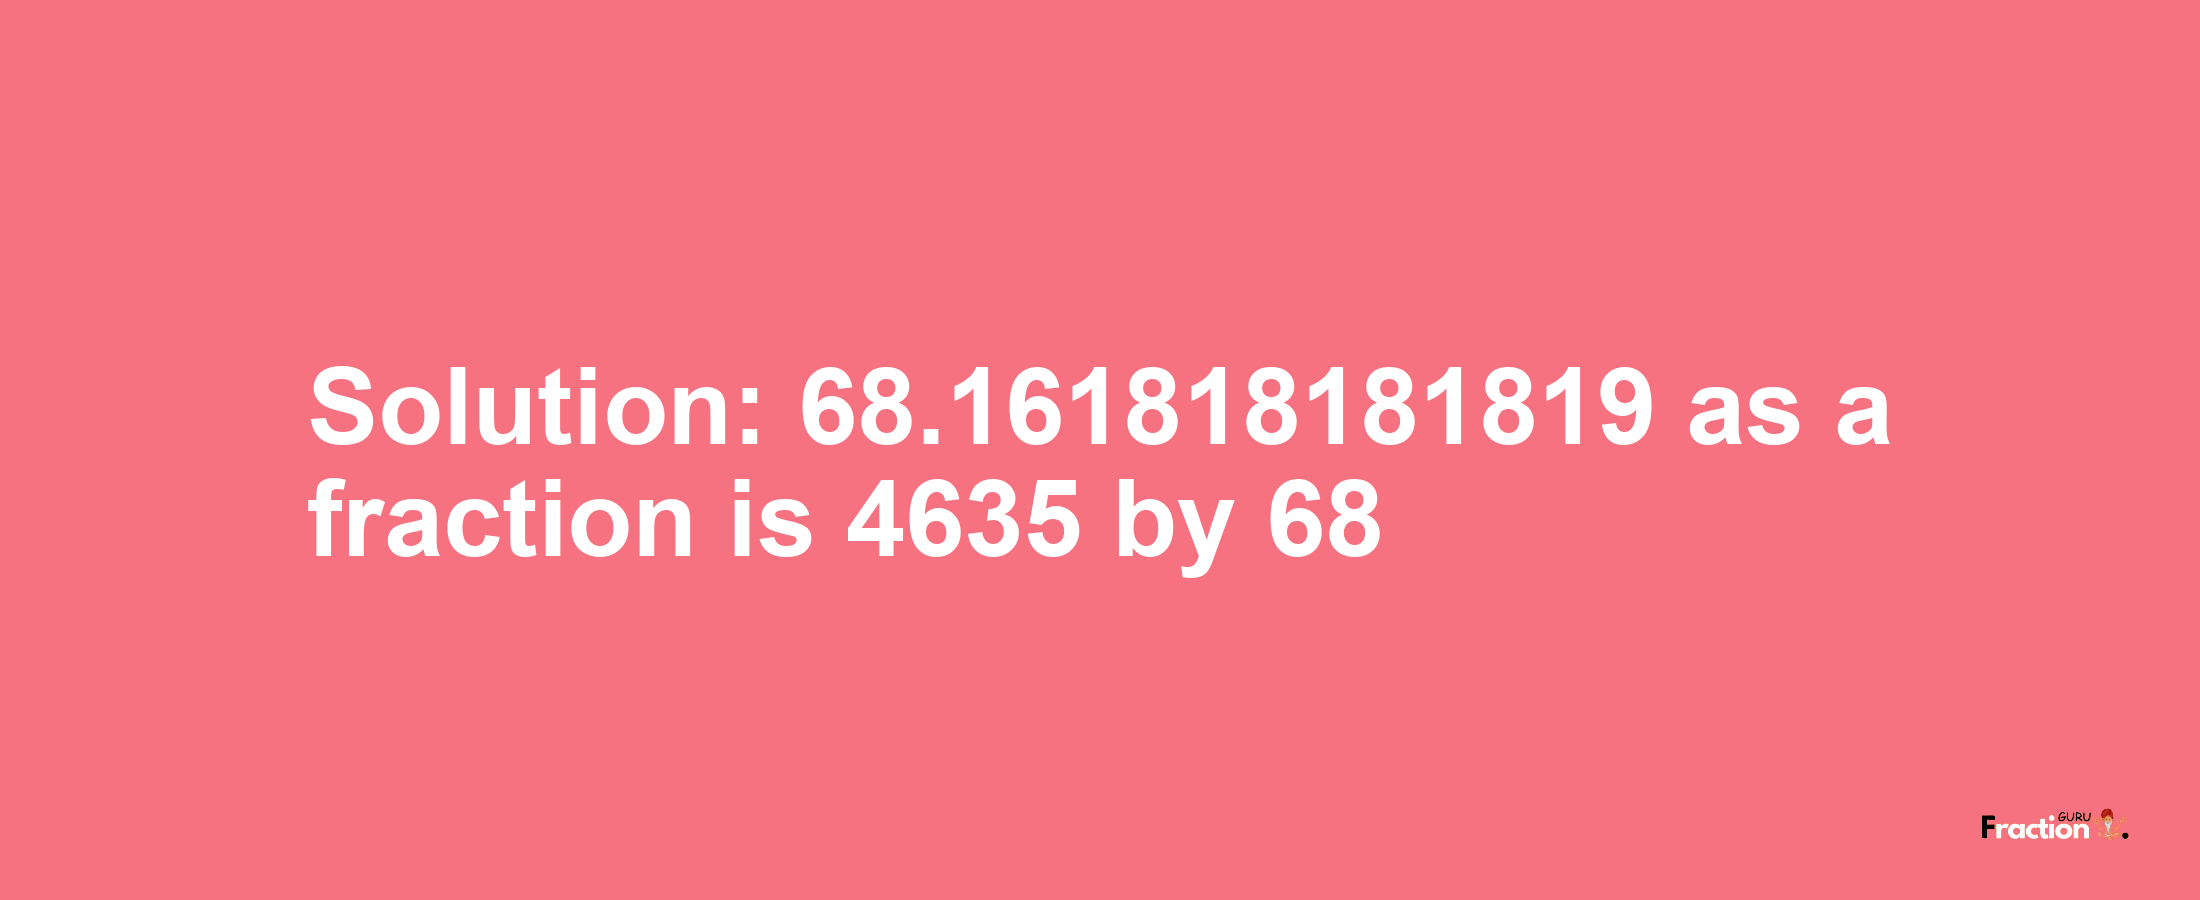 Solution:68.161818181819 as a fraction is 4635/68